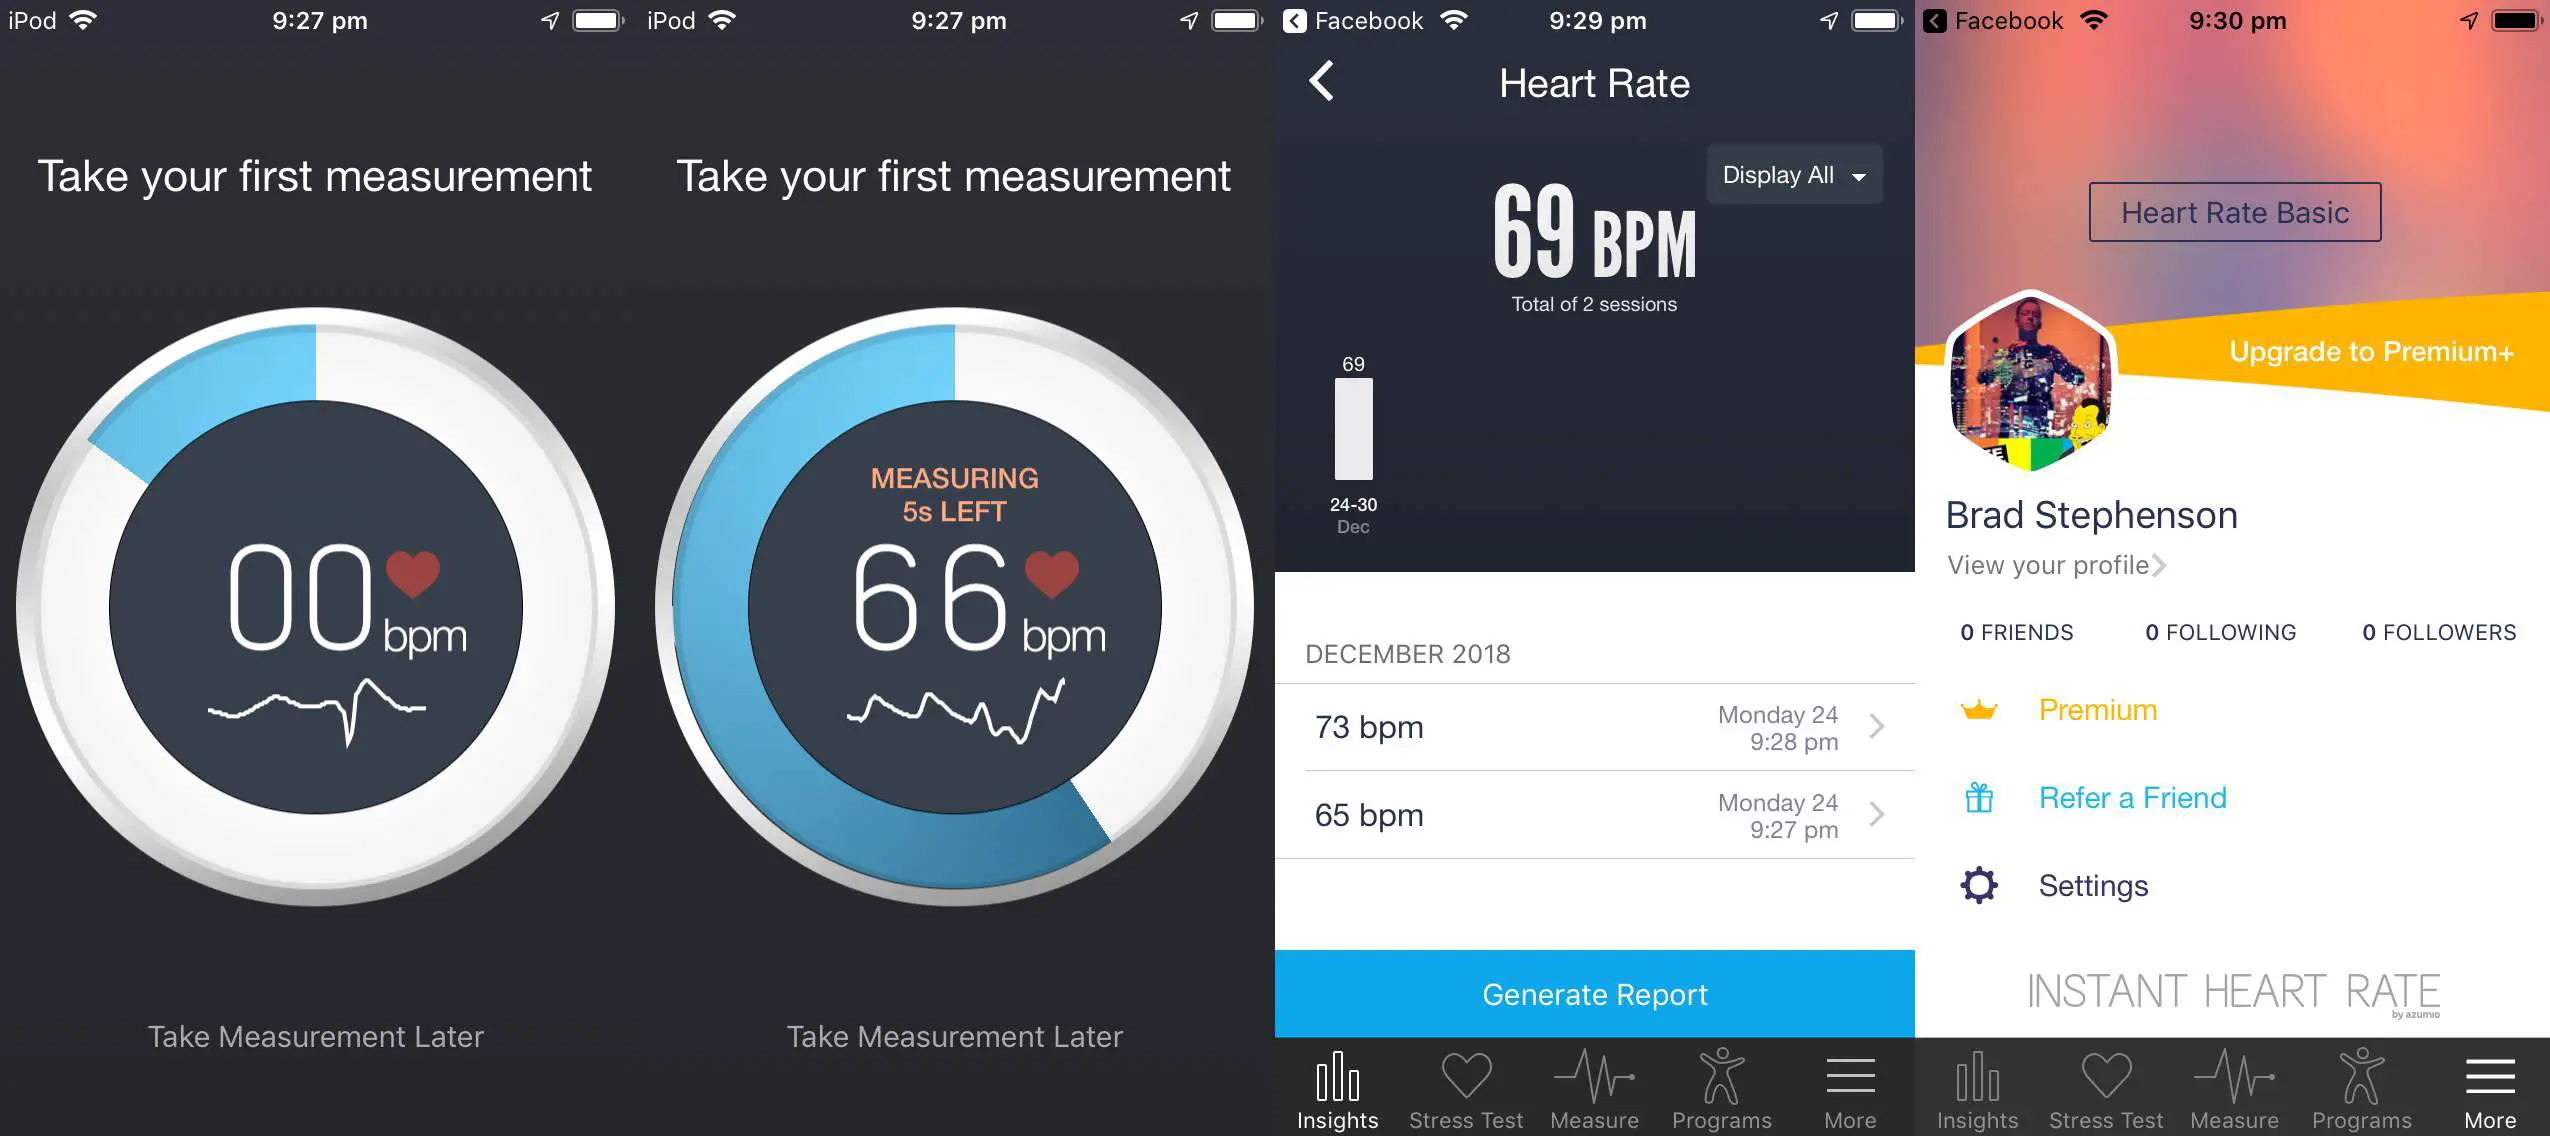 Aplicativo Instant Heart Rate no iPhone.